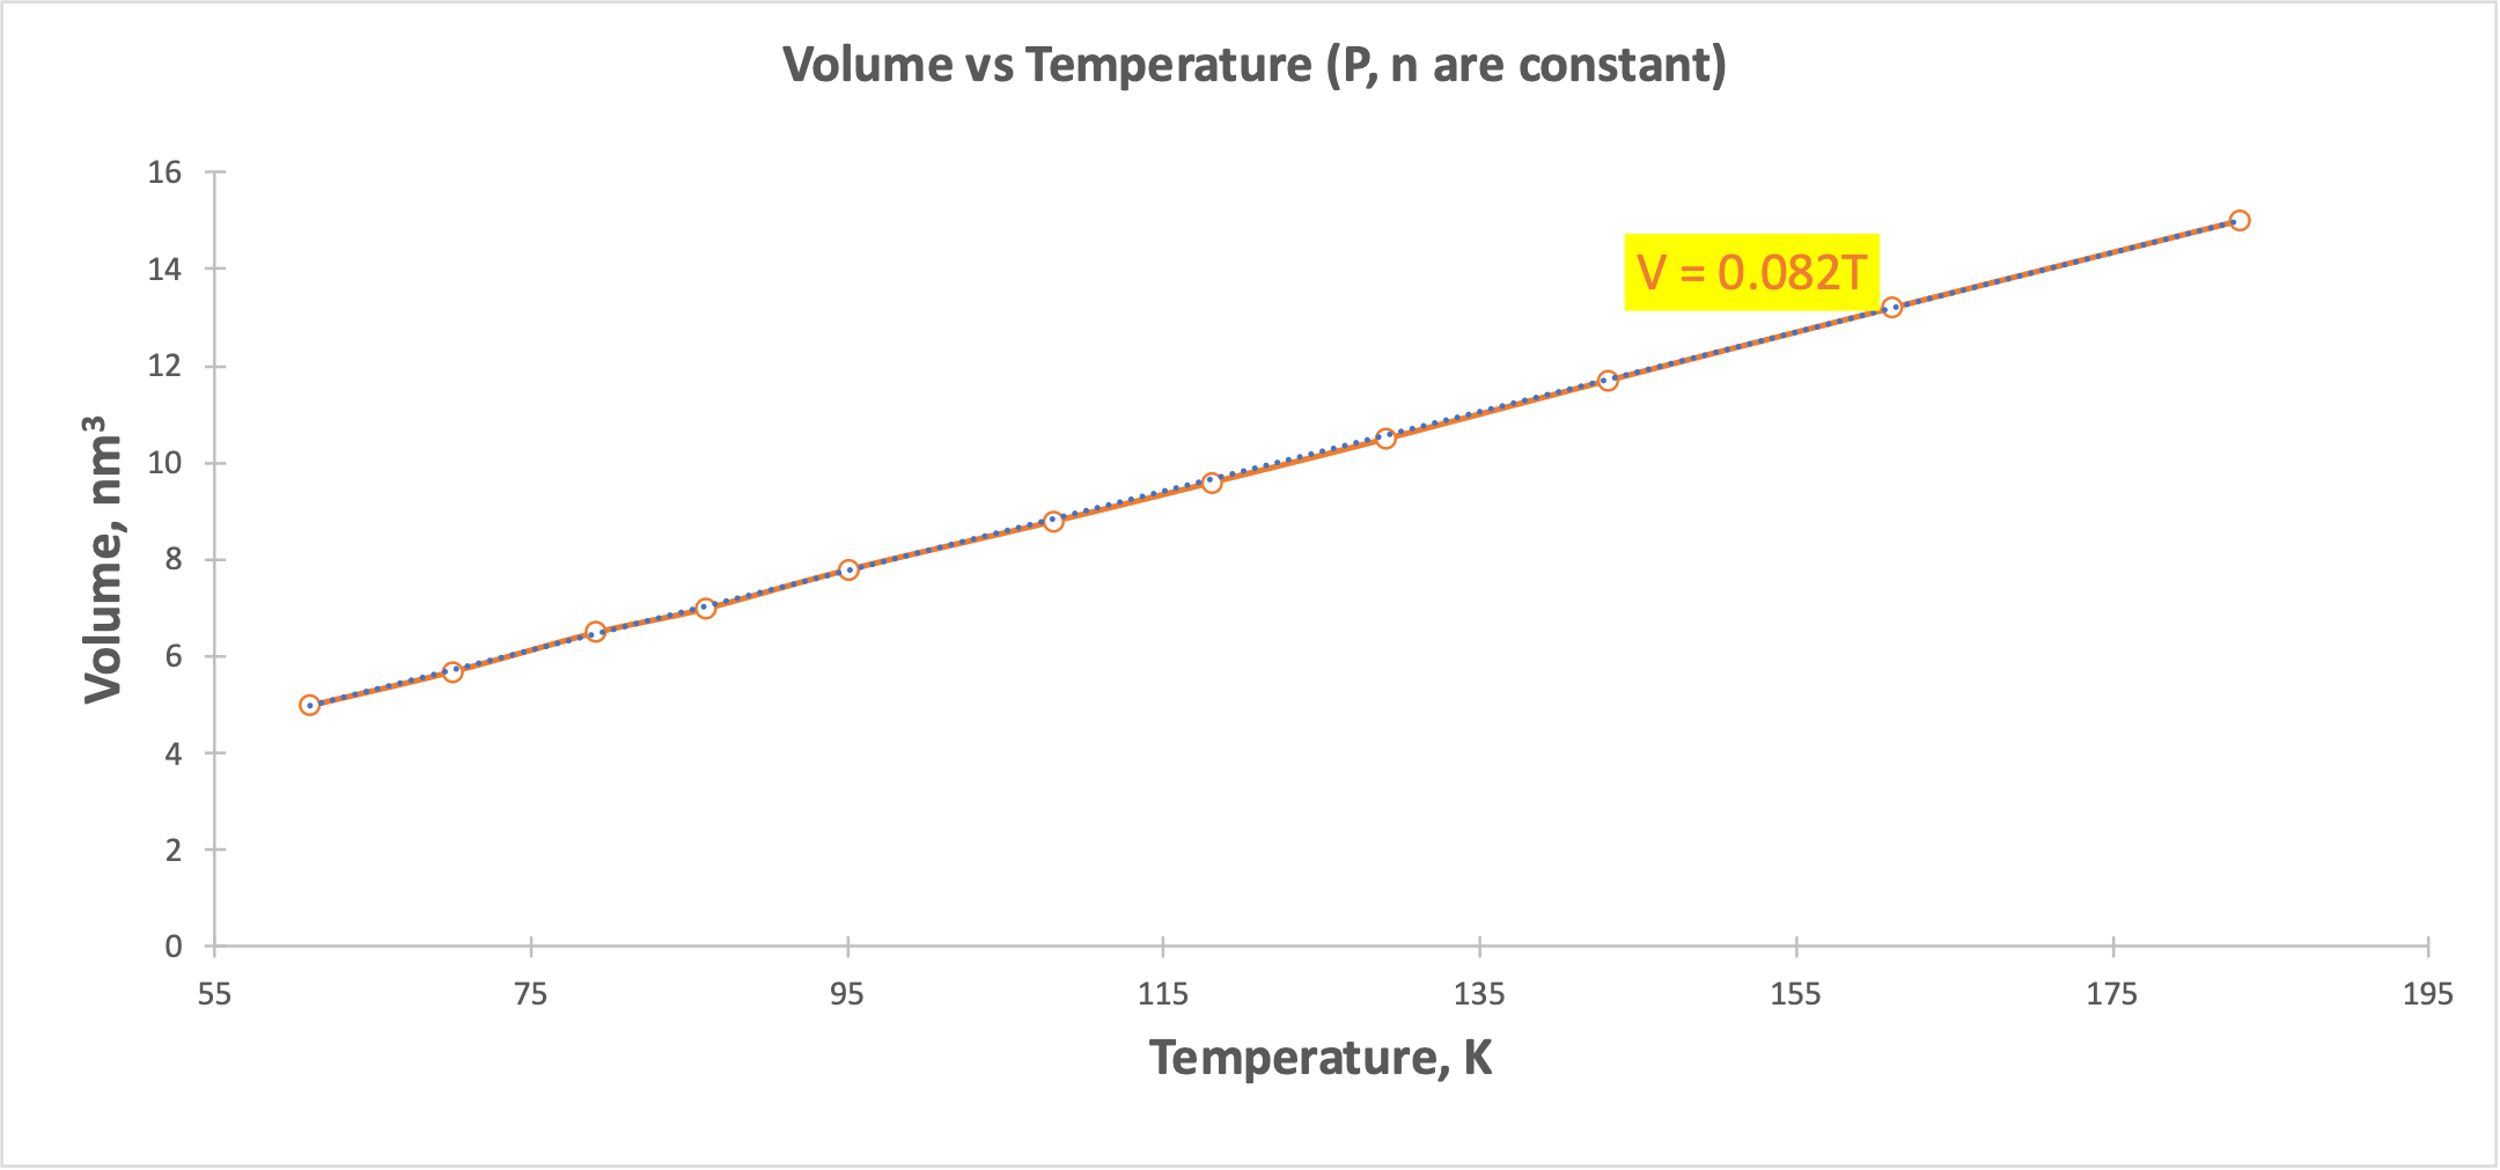 Dependence of volume on temperature at constant pressure and mole number (Charles’ Law)